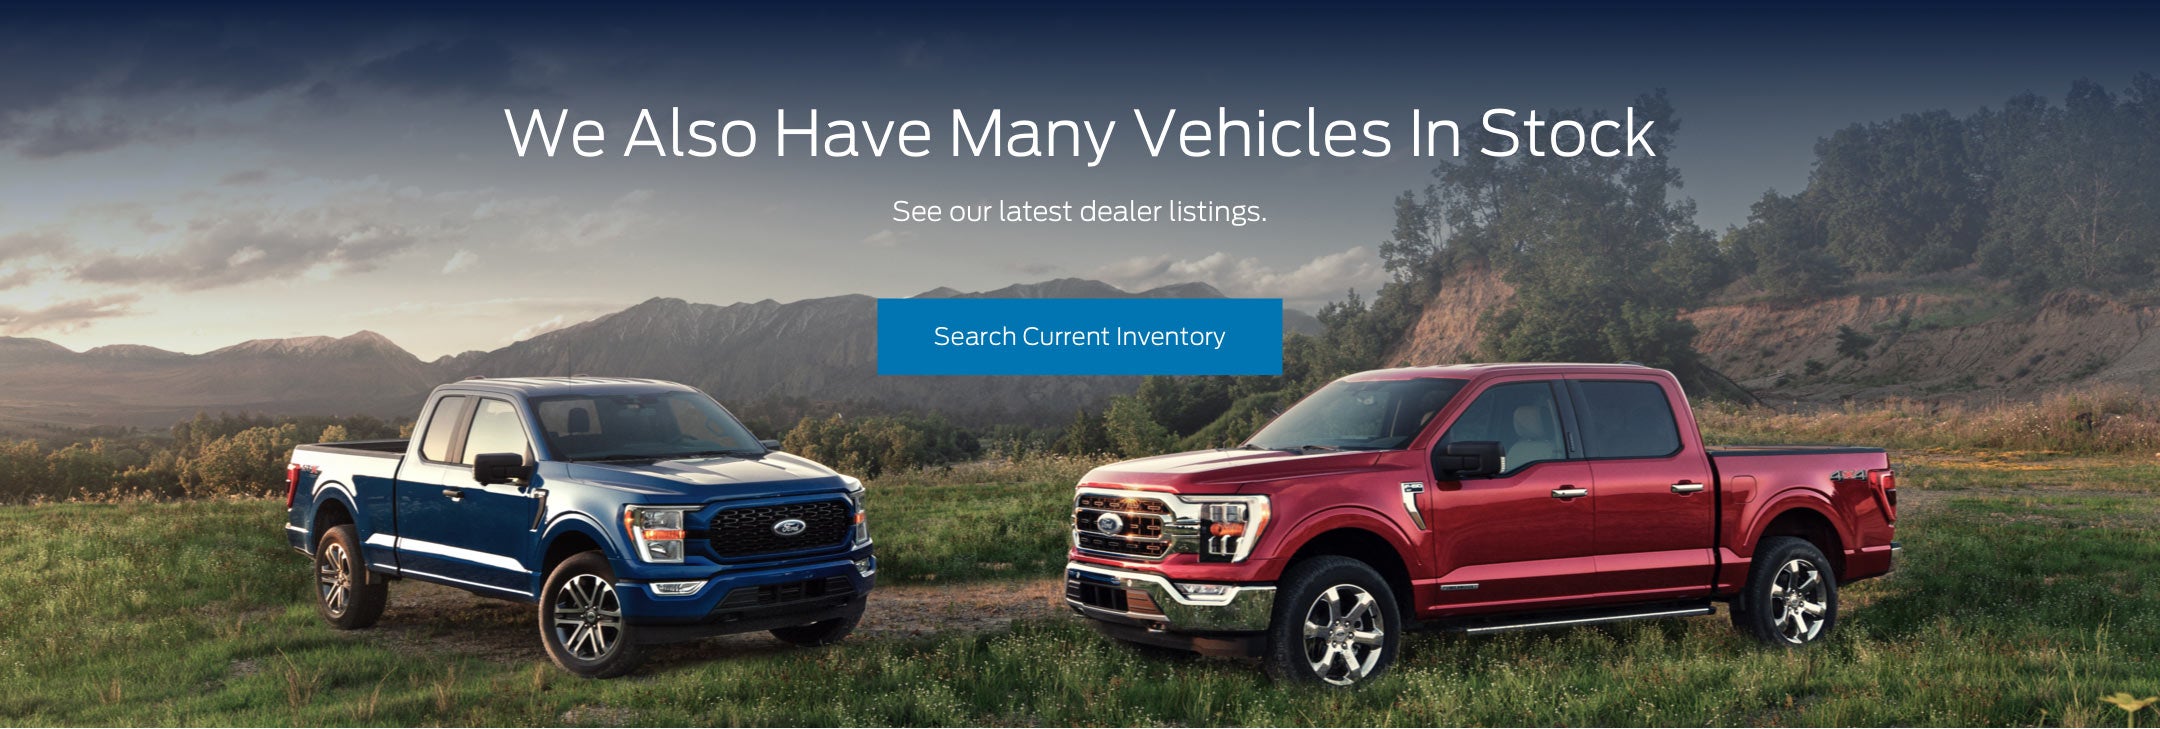 Ford vehicles in stock | Sykora Family Ford, Inc. in West TX